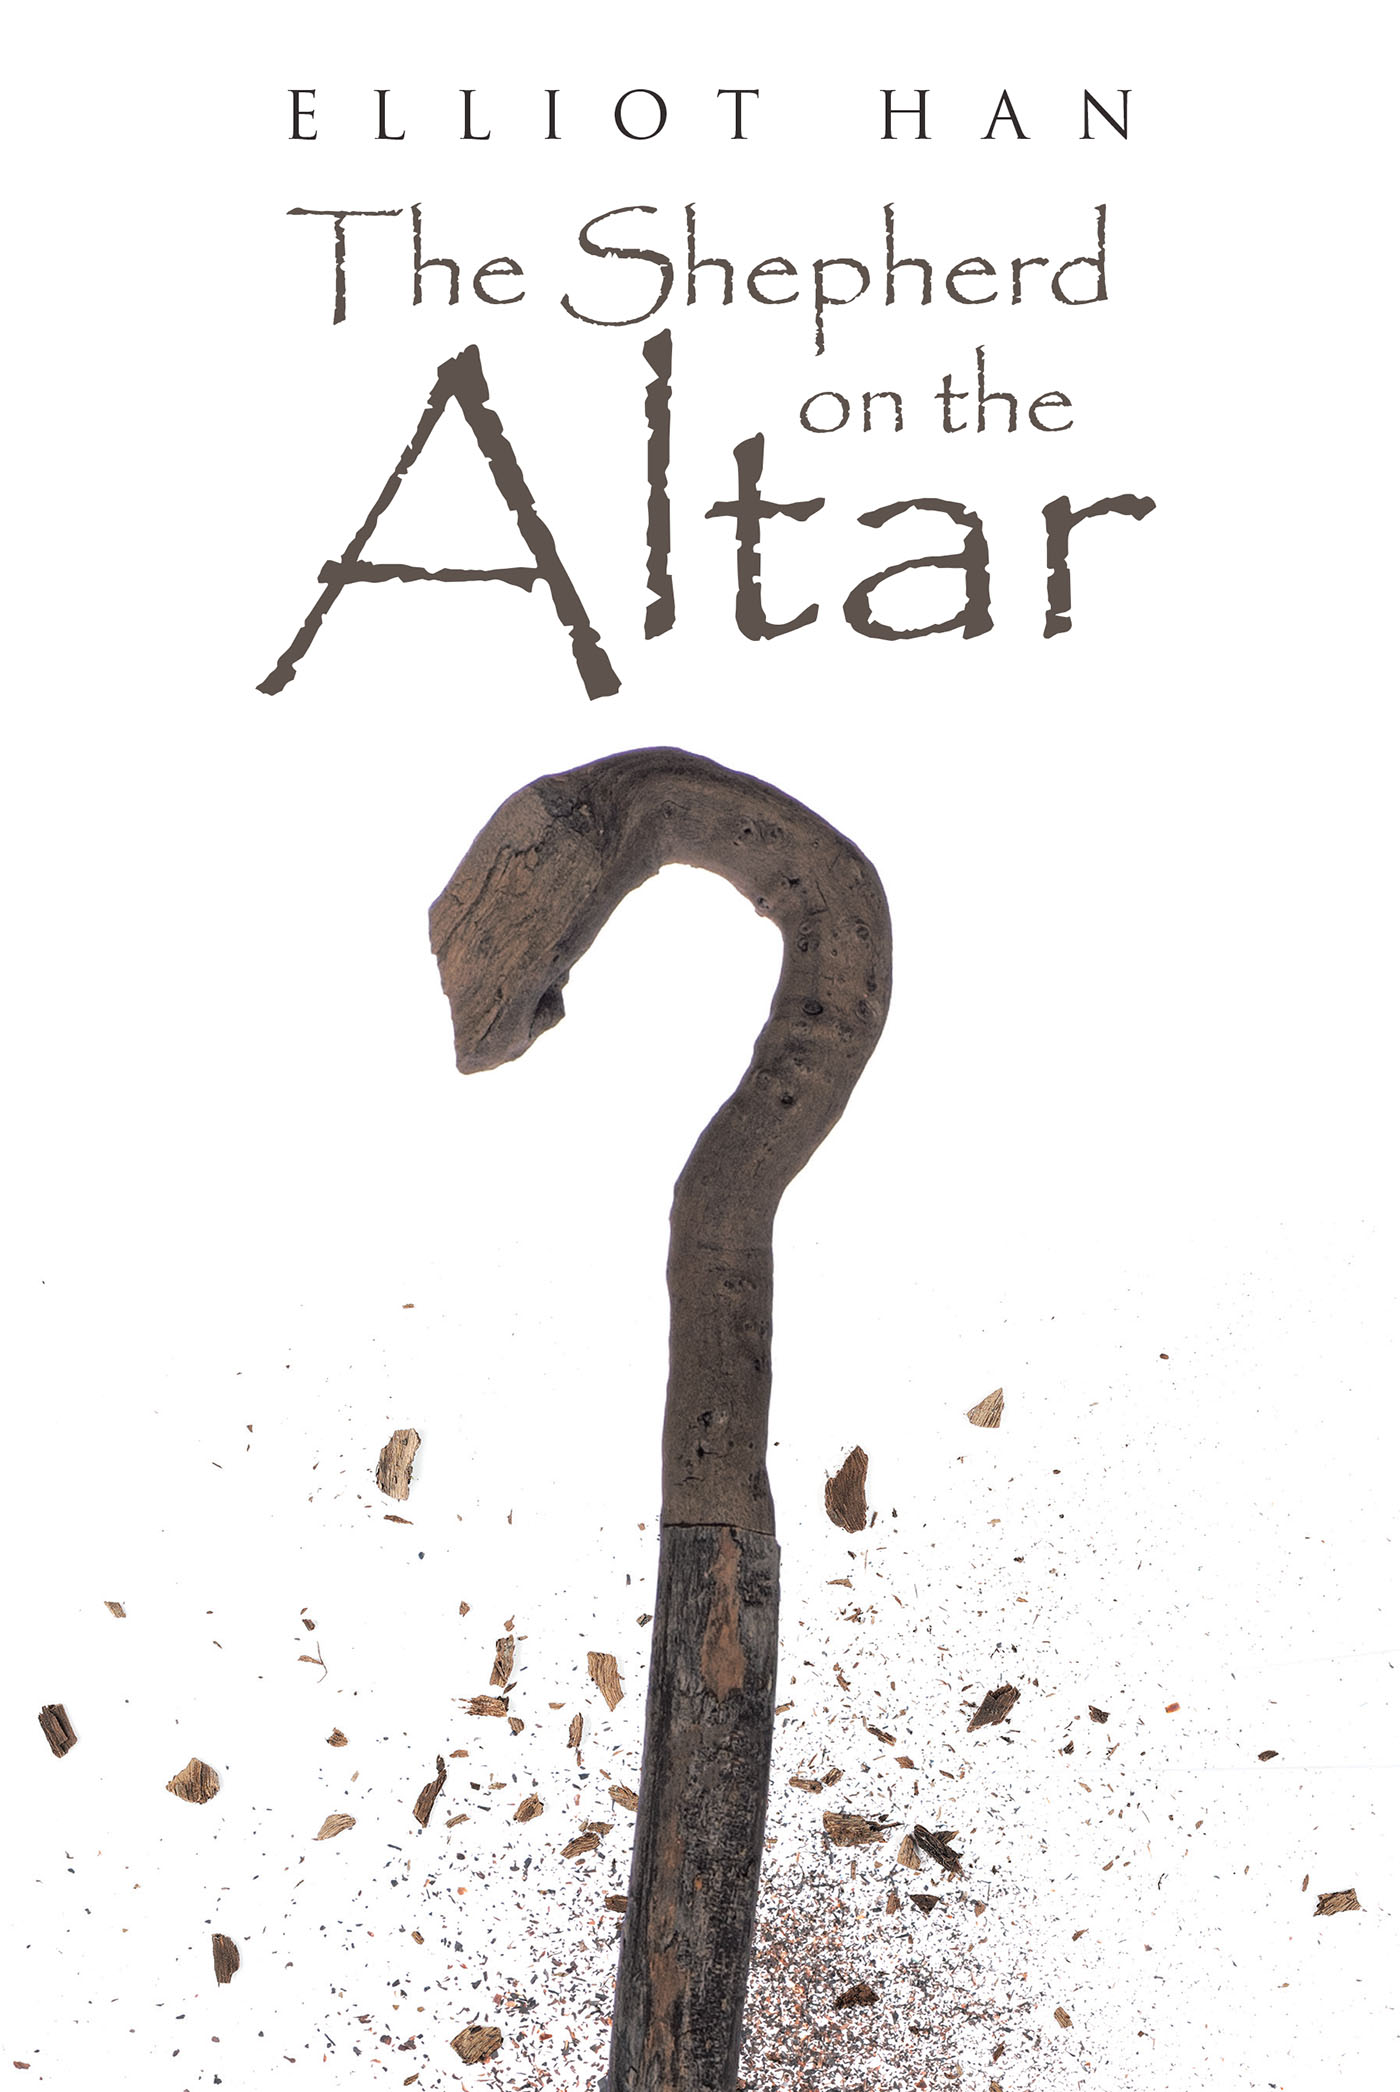 Author Elliot Han’s New Book, "The Shepherd on the Altar," is a Scripture-Based Novel That Explores the Story of Cain and Abel and Their Choices to Worship God or Not